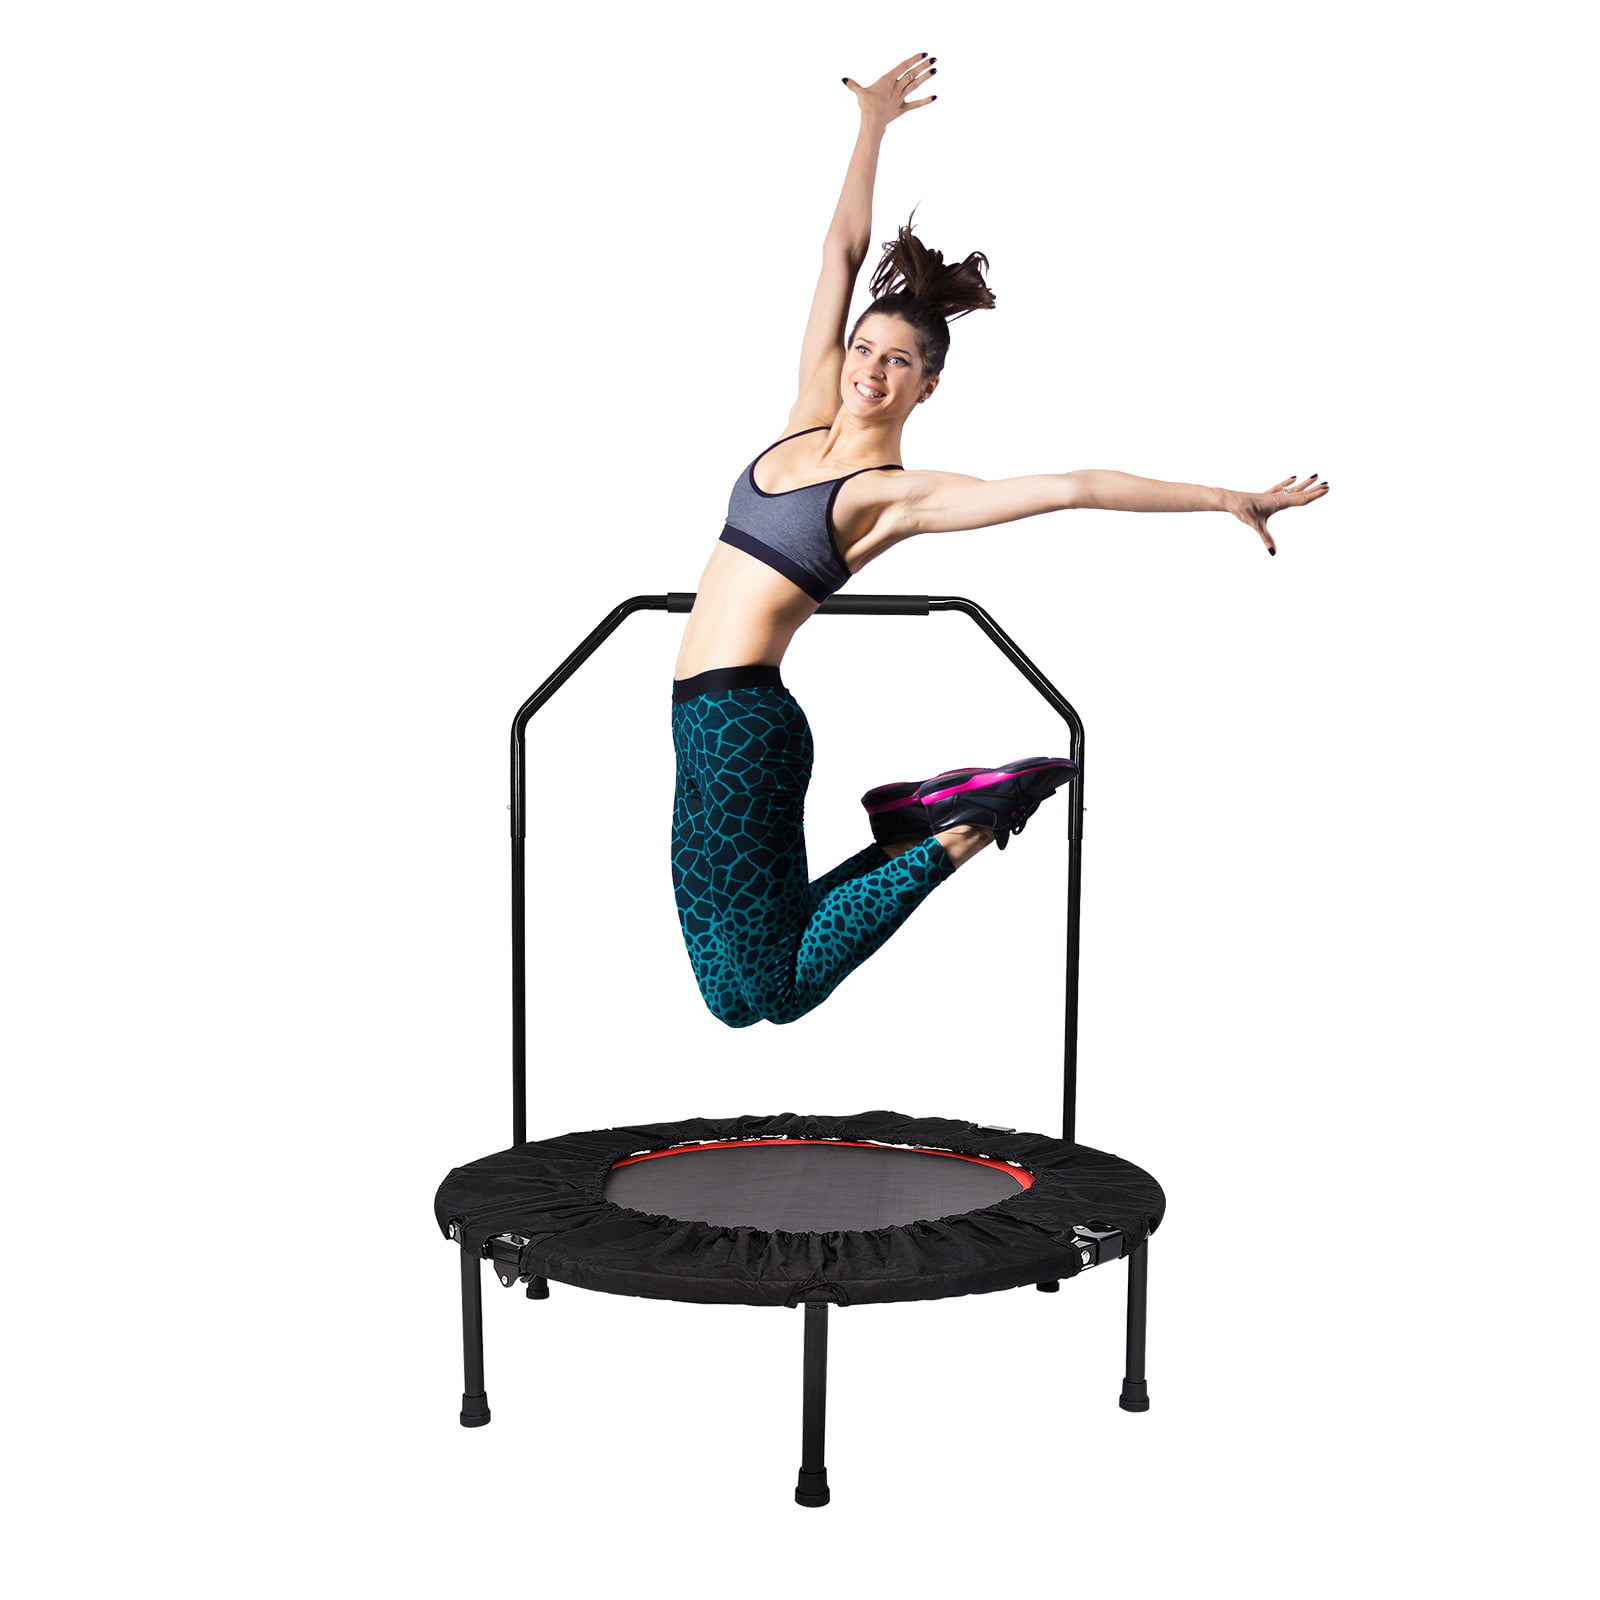 FitnessClub 40" Mini Rebounder Trampoline Jump Workout Exercise W/Hand Rail 